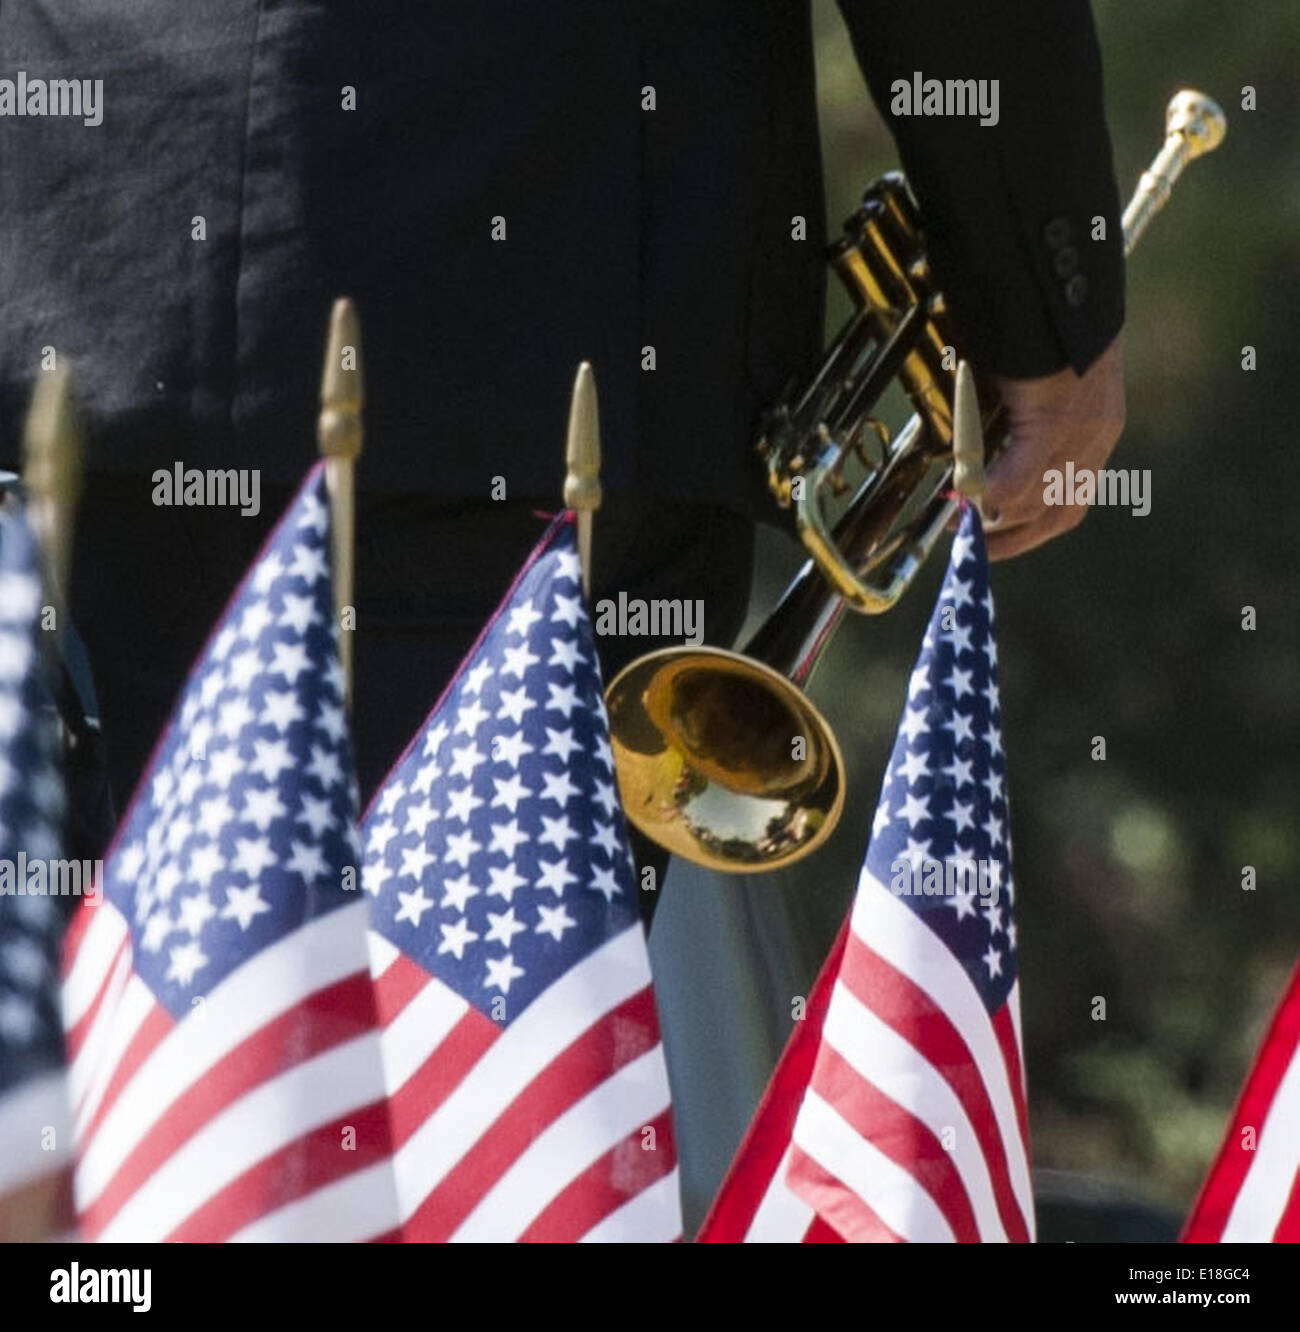 Capistrano Beach, California, USA. 26th May, 2014. DAVID LONGORIA came down from Pasadena to play Taps for Monday's Memorial Day ceremony at Pines Park. Taps can be played on trumpet or a bugle and is a traditional Memorial Day honor meant to remember veterans and their sacrifice in service to their country. Credit:  David Bro/ZUMAPRESS.com/Alamy Live News Stock Photo